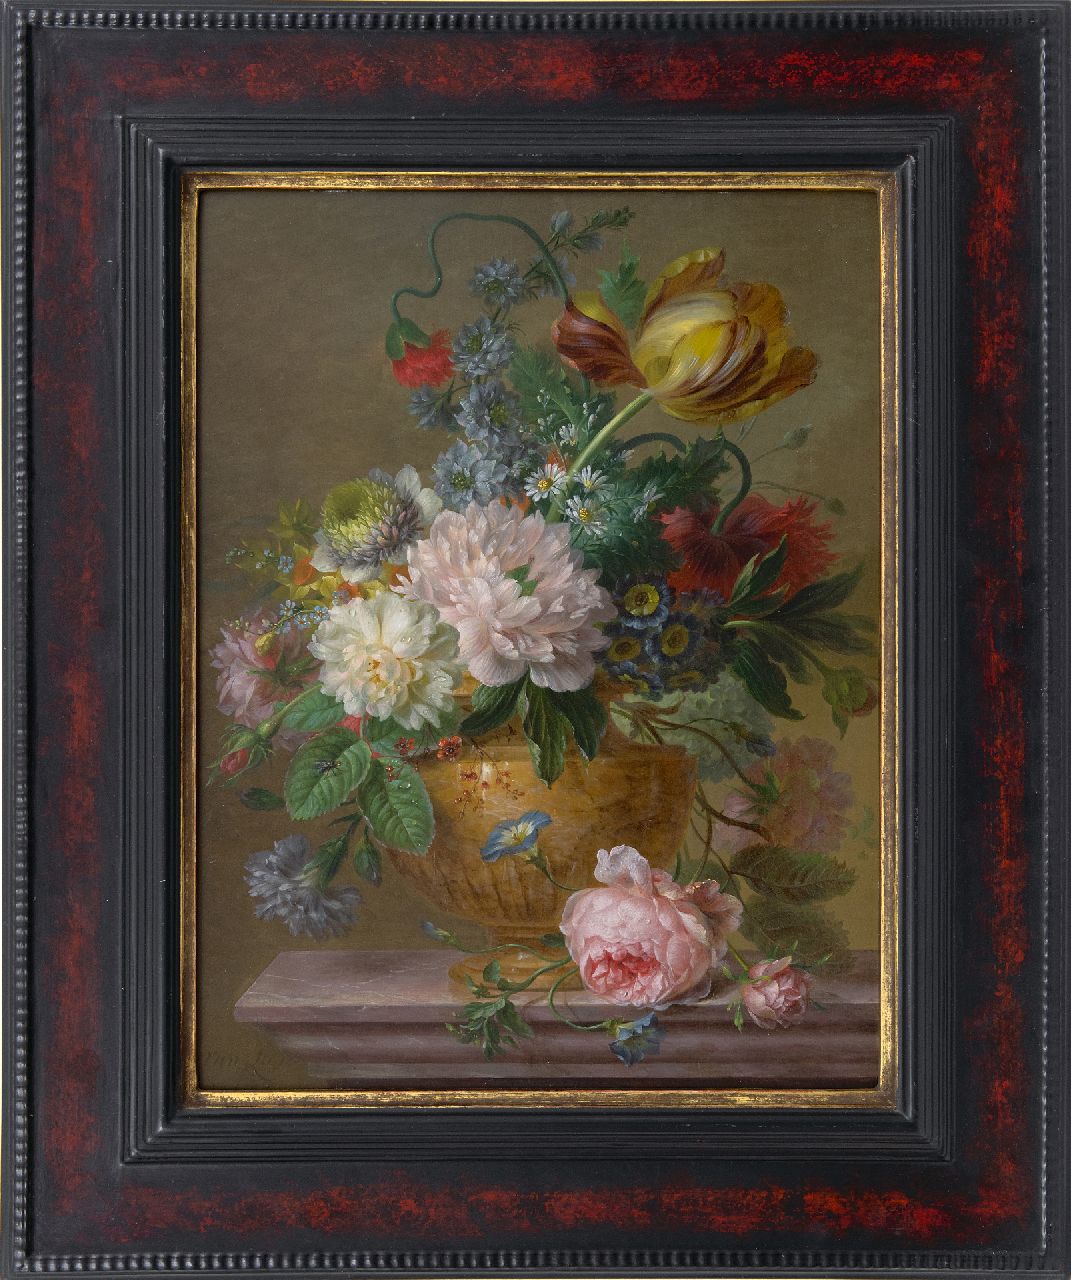 Leen W. van | Willem van Leen, Flower still life with peonies and tulips, oil on panel 48.8 x 36.7 cm, signed l.l.